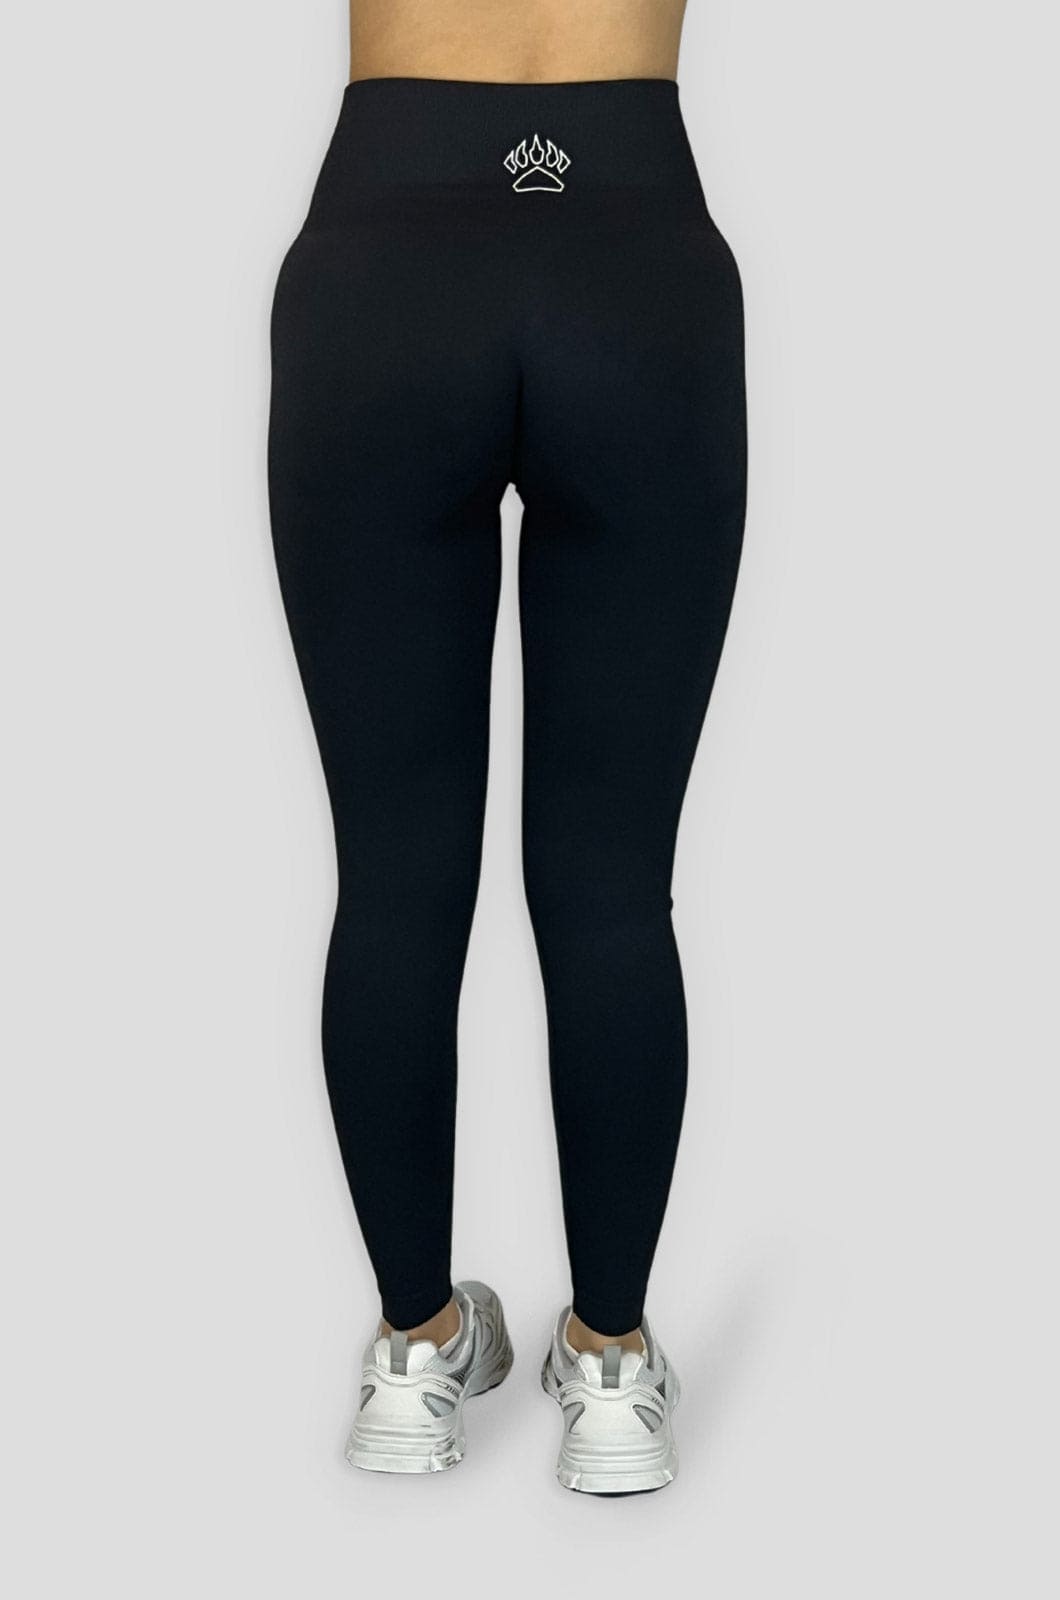 Smooth Seamless Leggings – Grizzly Gym Wear